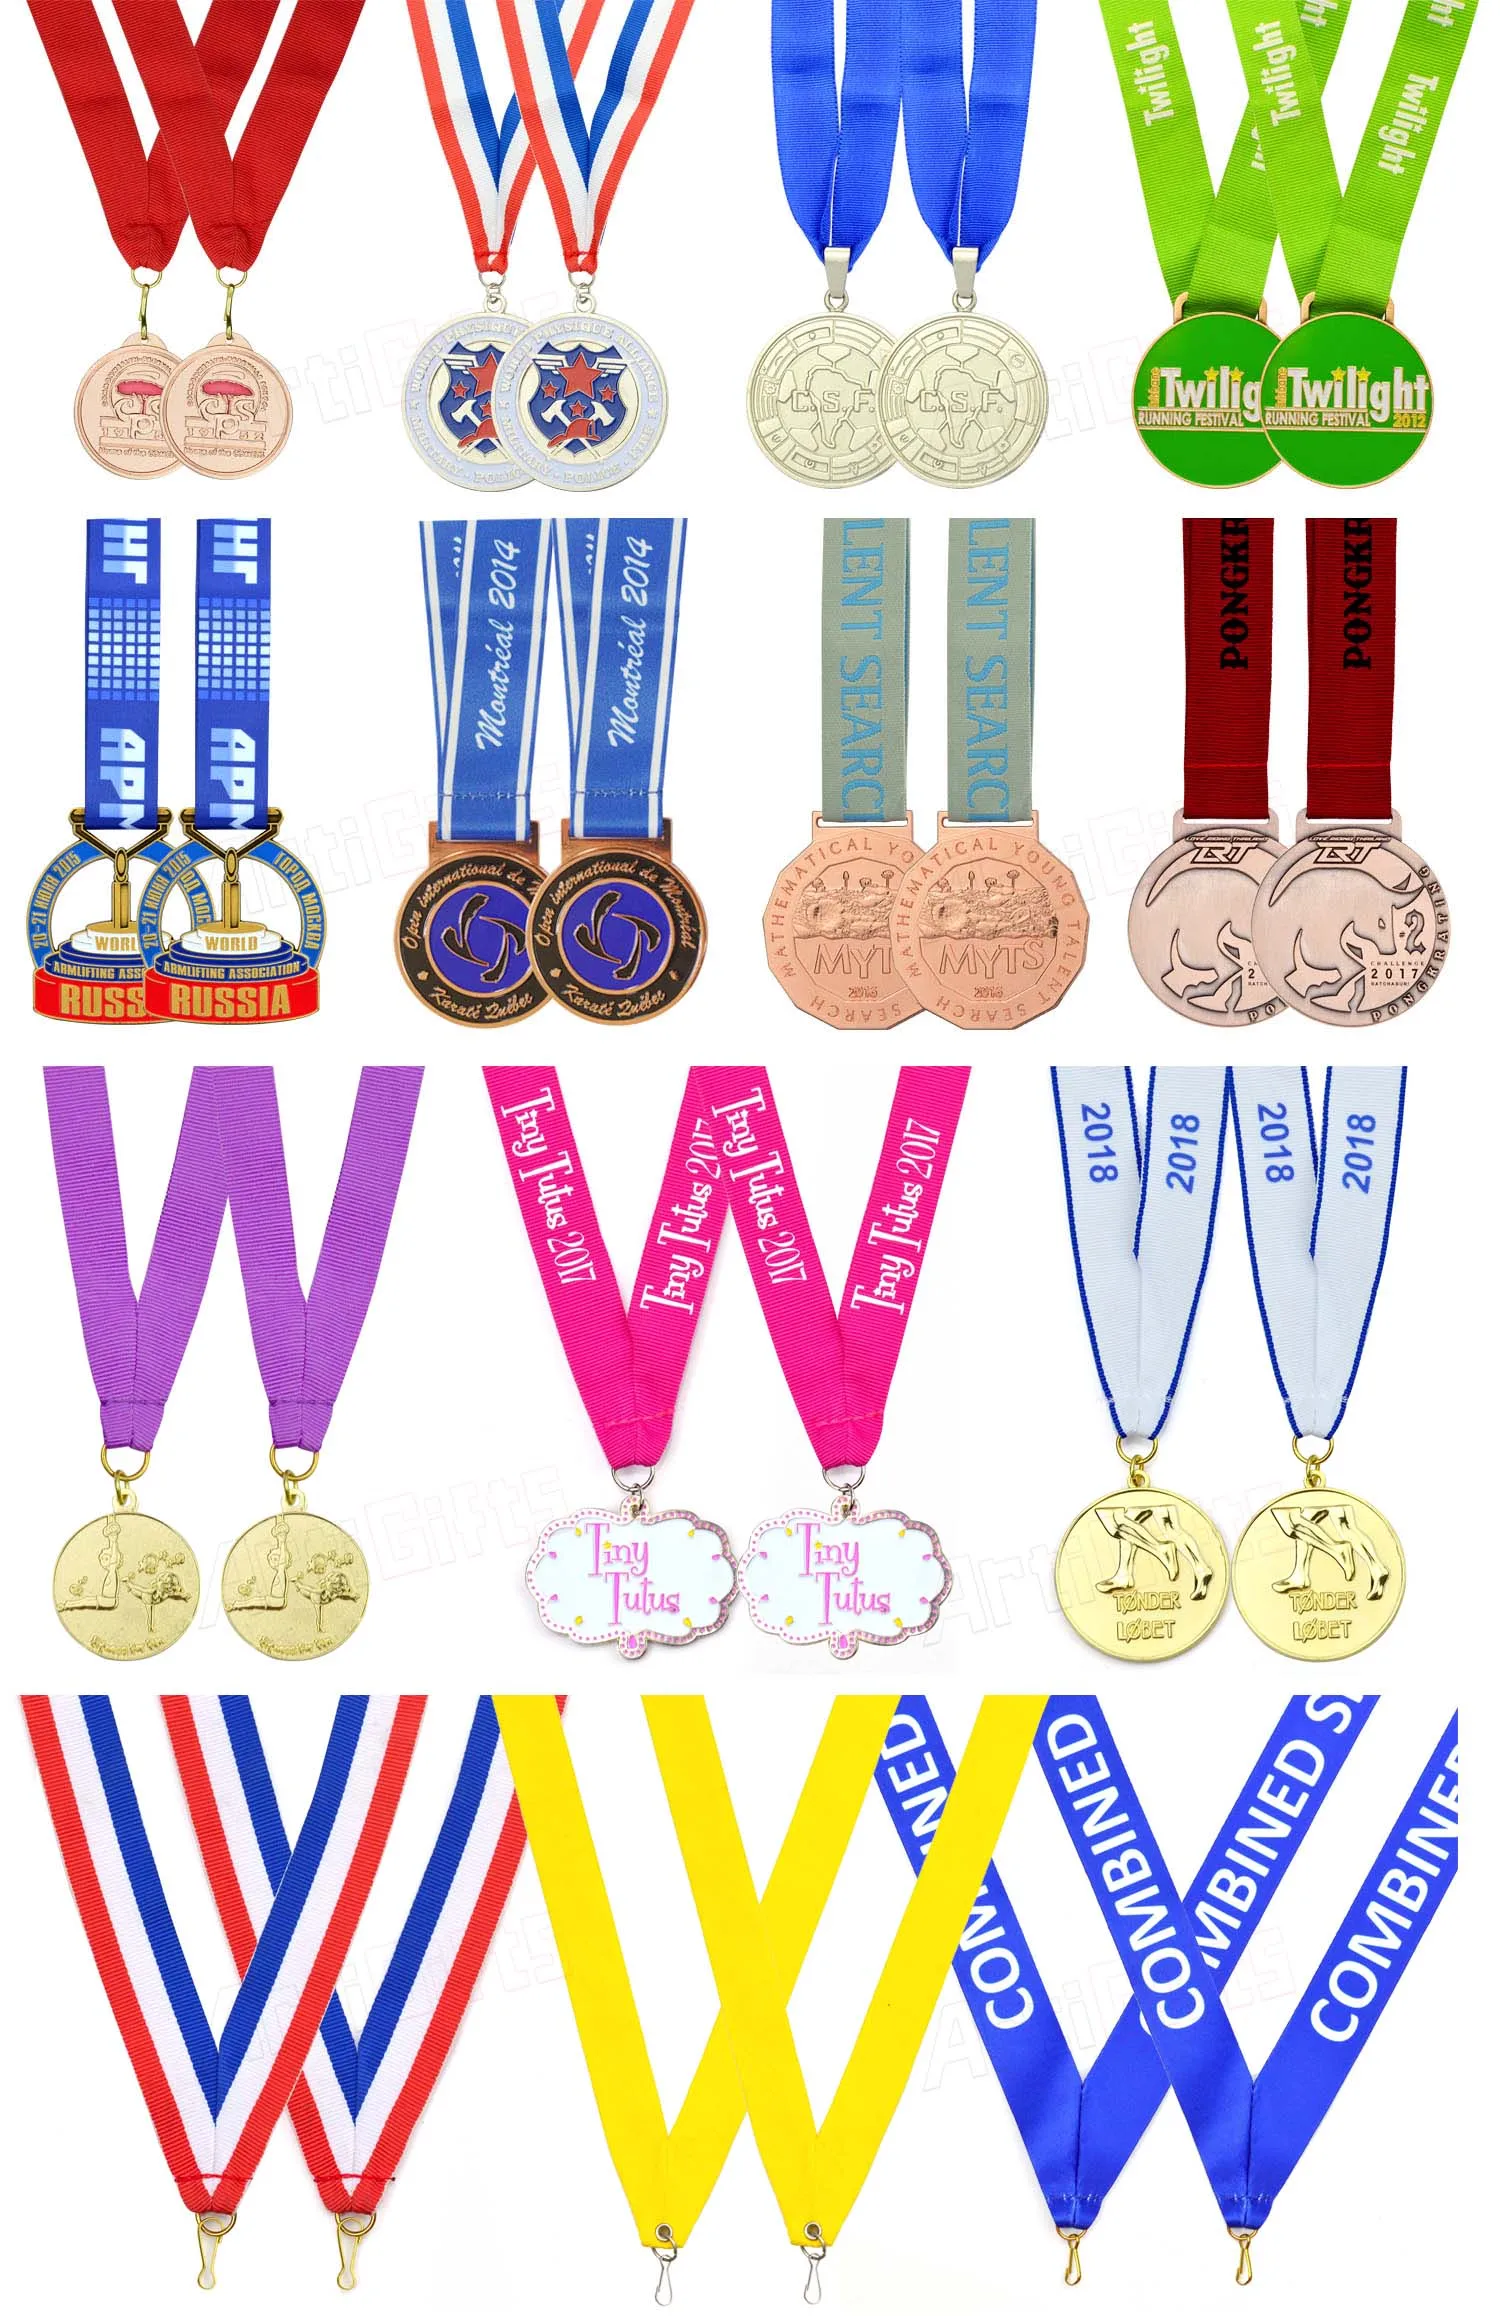 Artigifts make your own custom badminton gold medalist medal perfect for sports